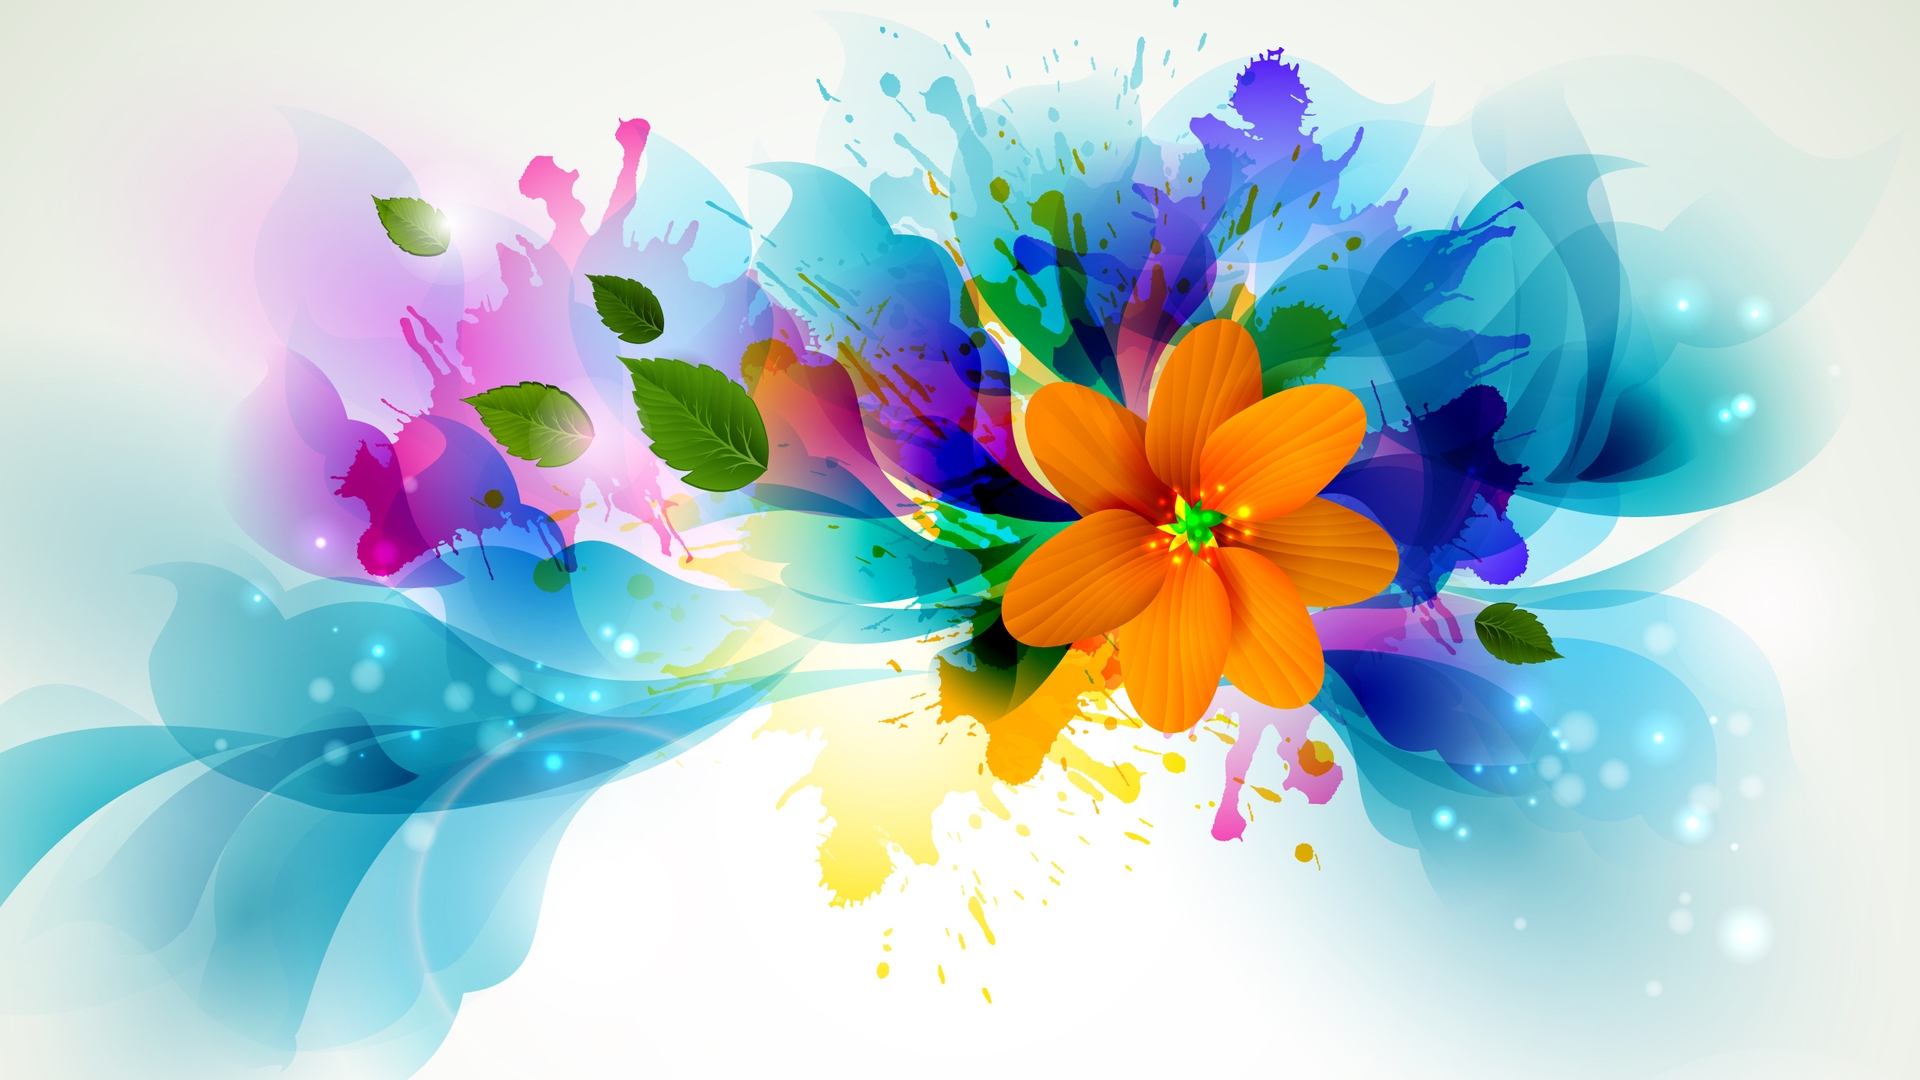 Bright Flowers for 1920 x 1080 HDTV 1080p resolution